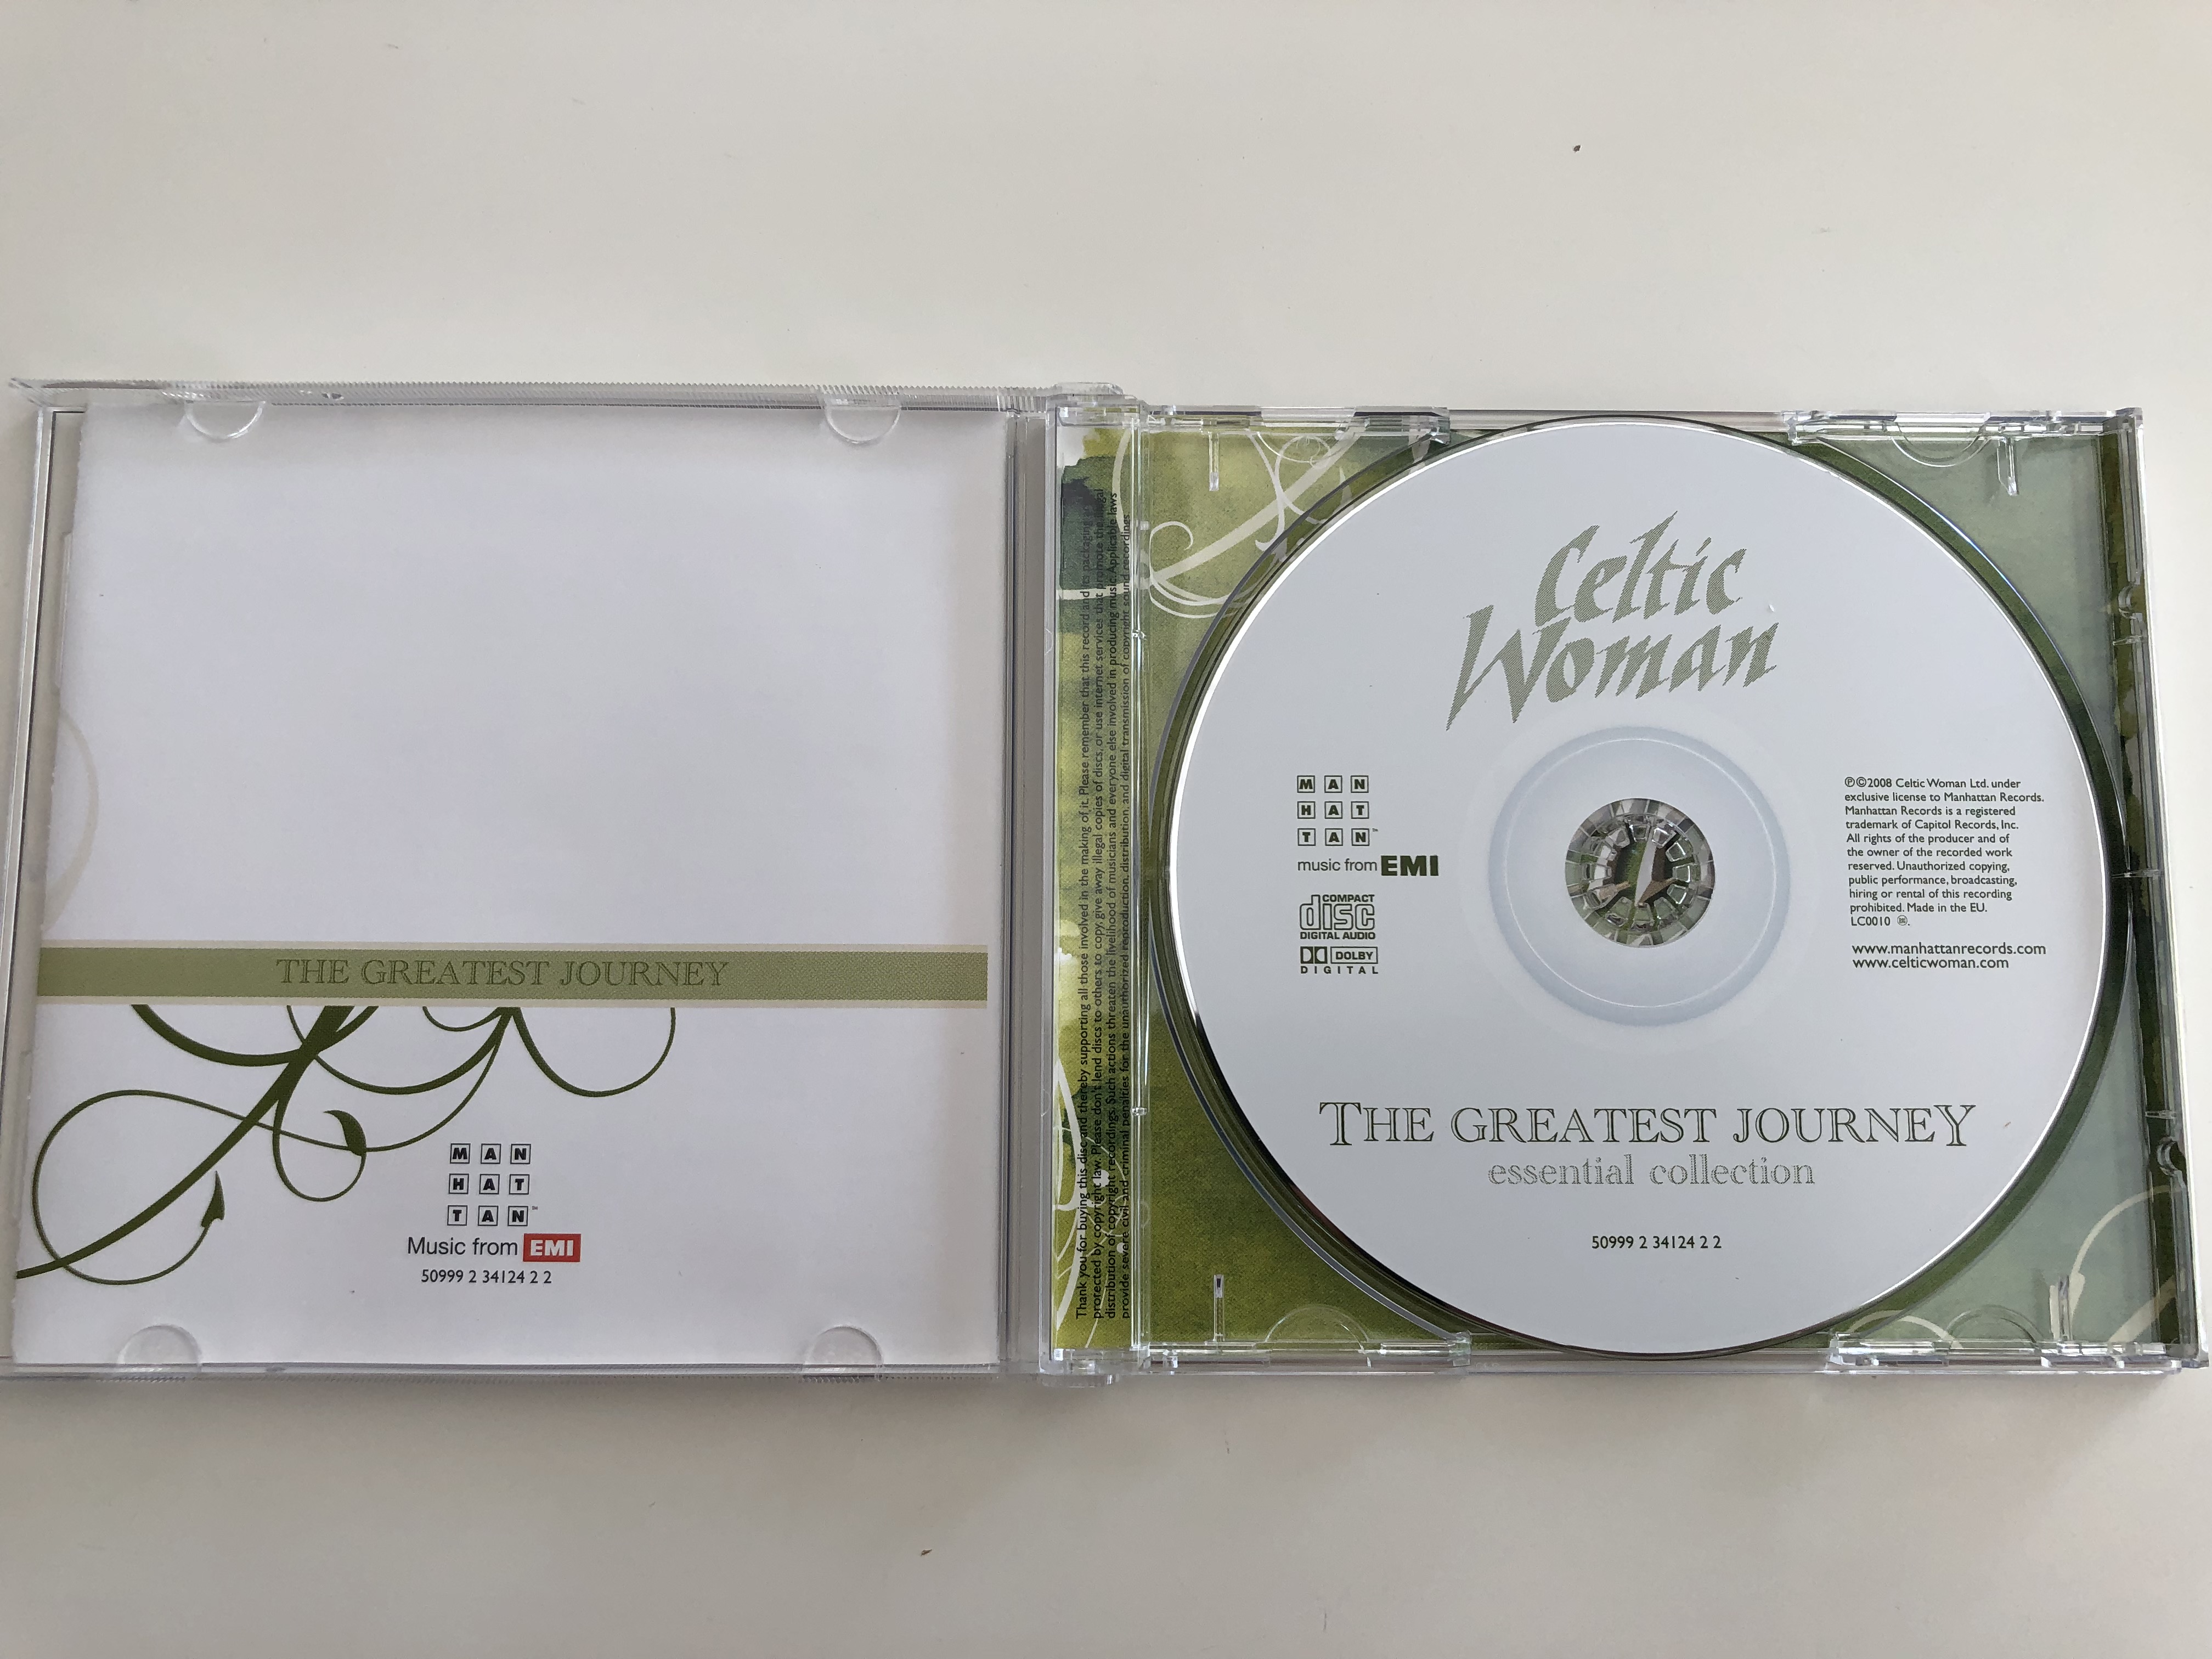 celtic-woman-the-greatest-journey-essential-collection-emi-audio-cd-2008-6-.jpg